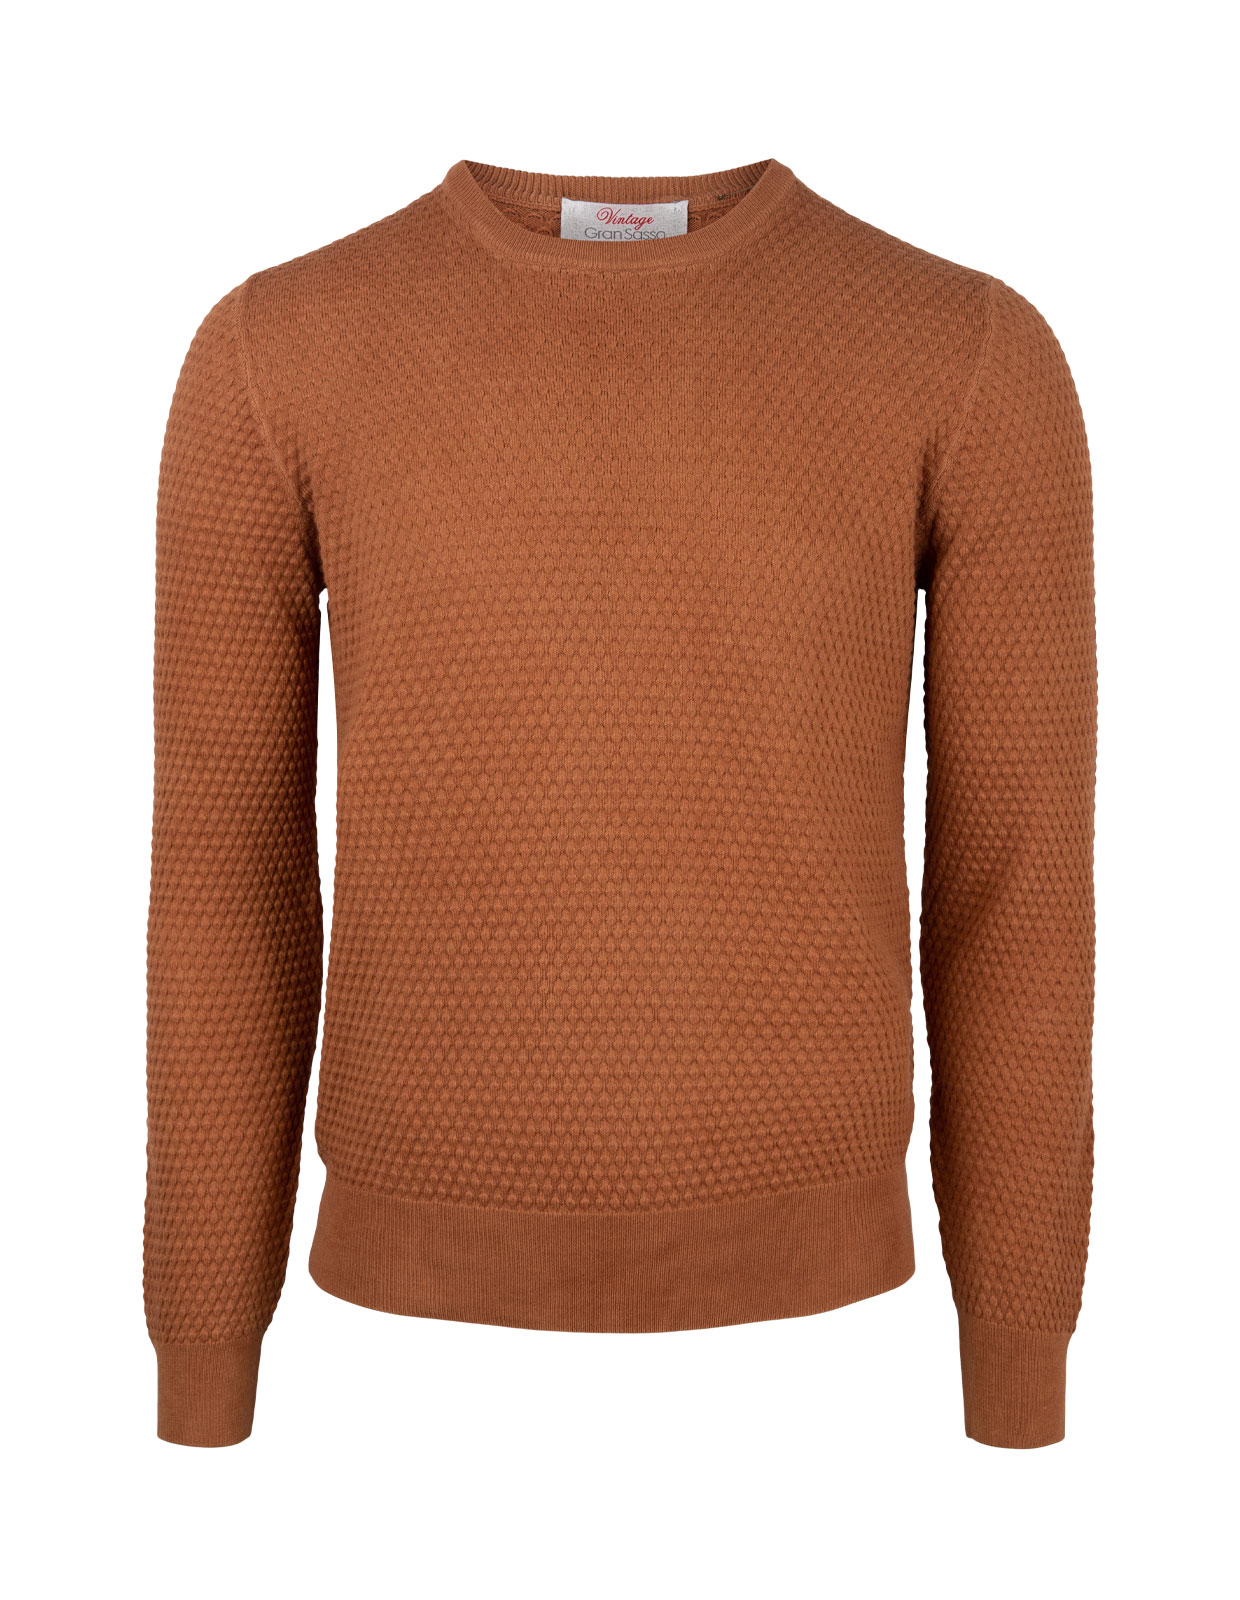 Crew Neck Knitted Texture Cotton Tobacco Stl 54